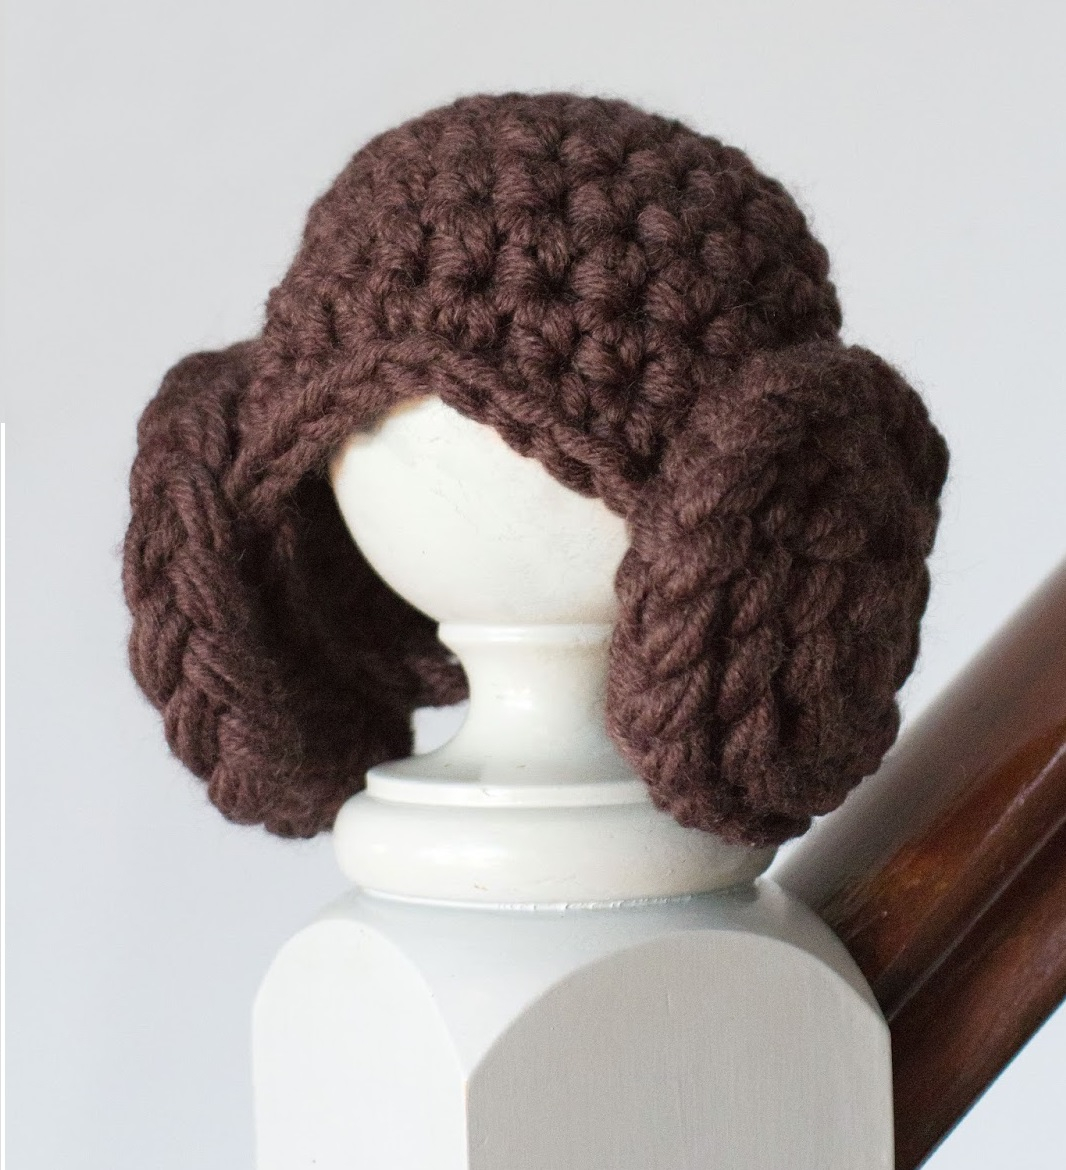 Crochet Hair Patterns The Star Wars Crochet Patterns Youre Looking For Stitch And Unwind